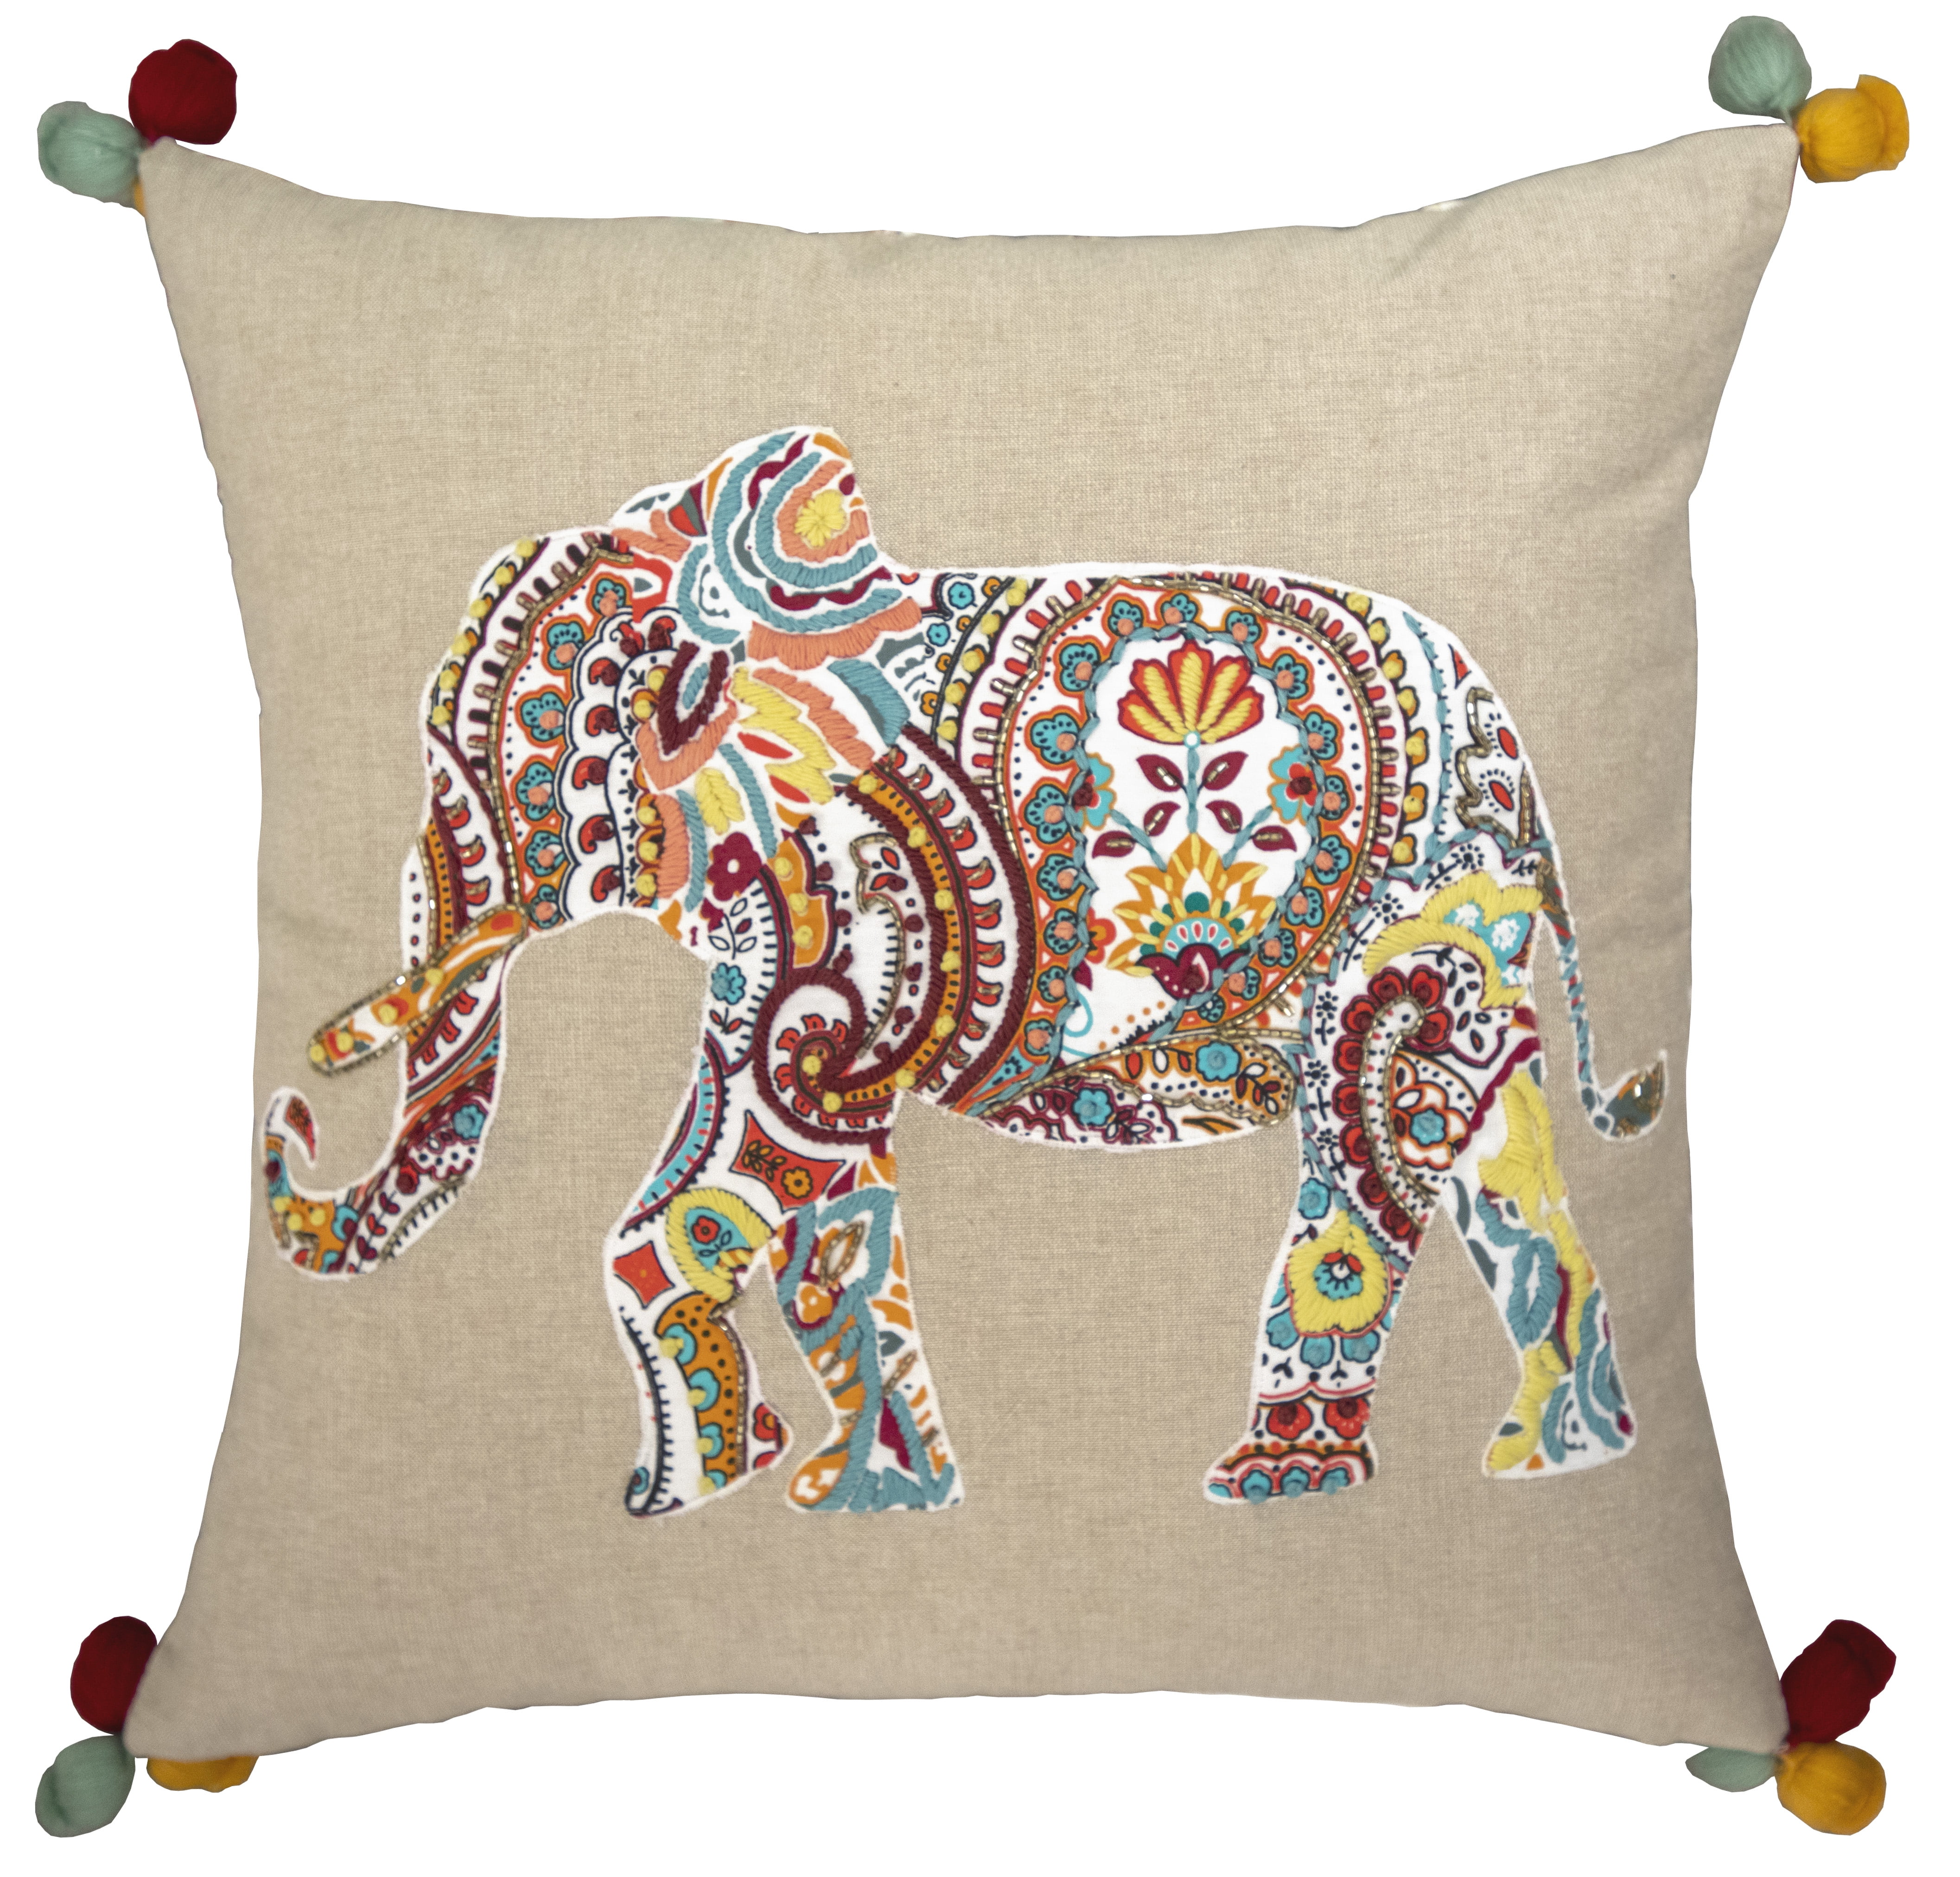 Elephant Pillow with Applique and Embroidery